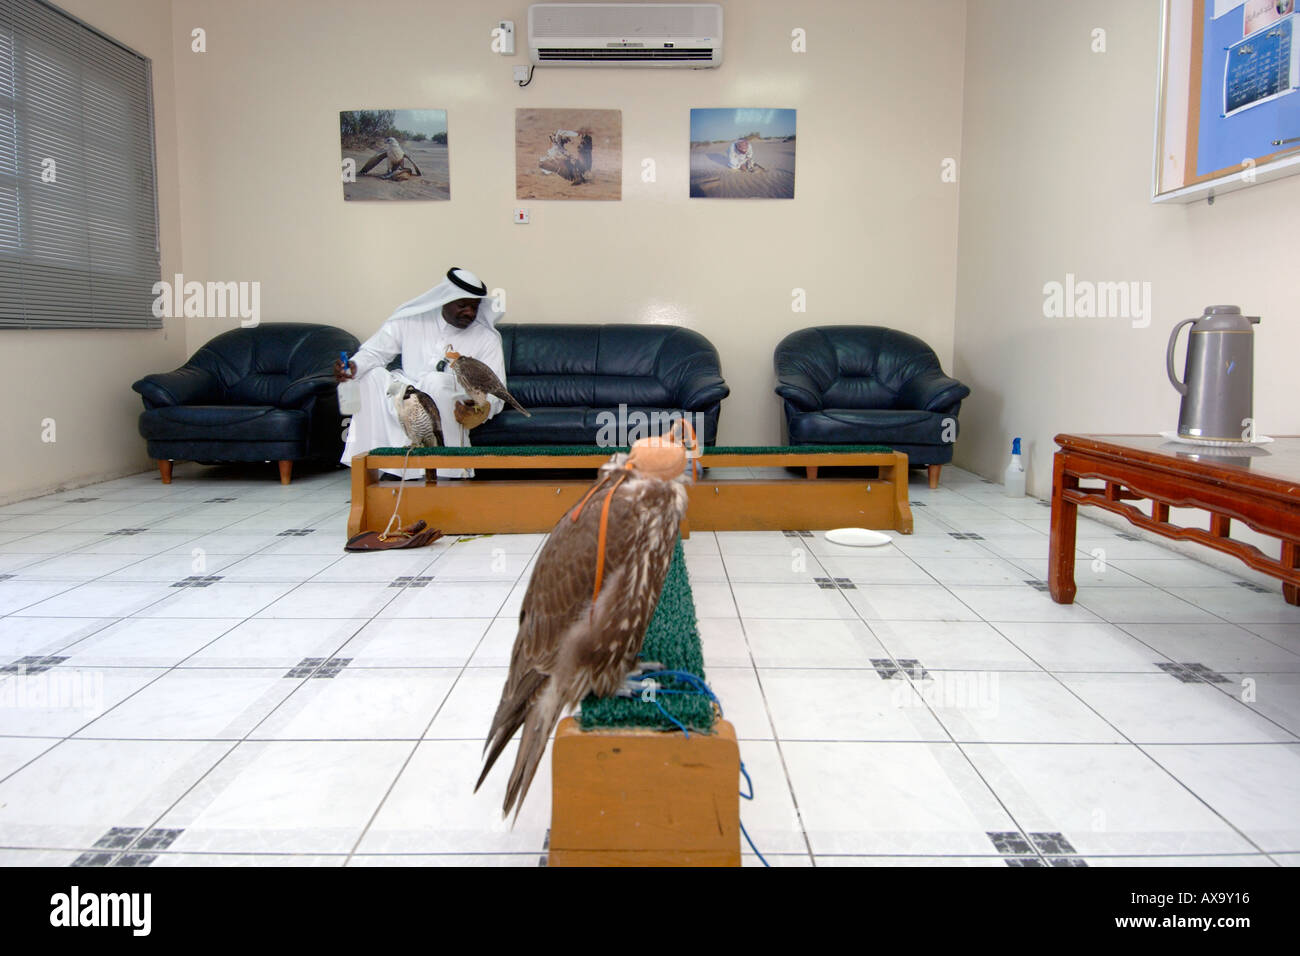 A Qatari With Hooded Falcons In The Waiting Room Of The Falcon